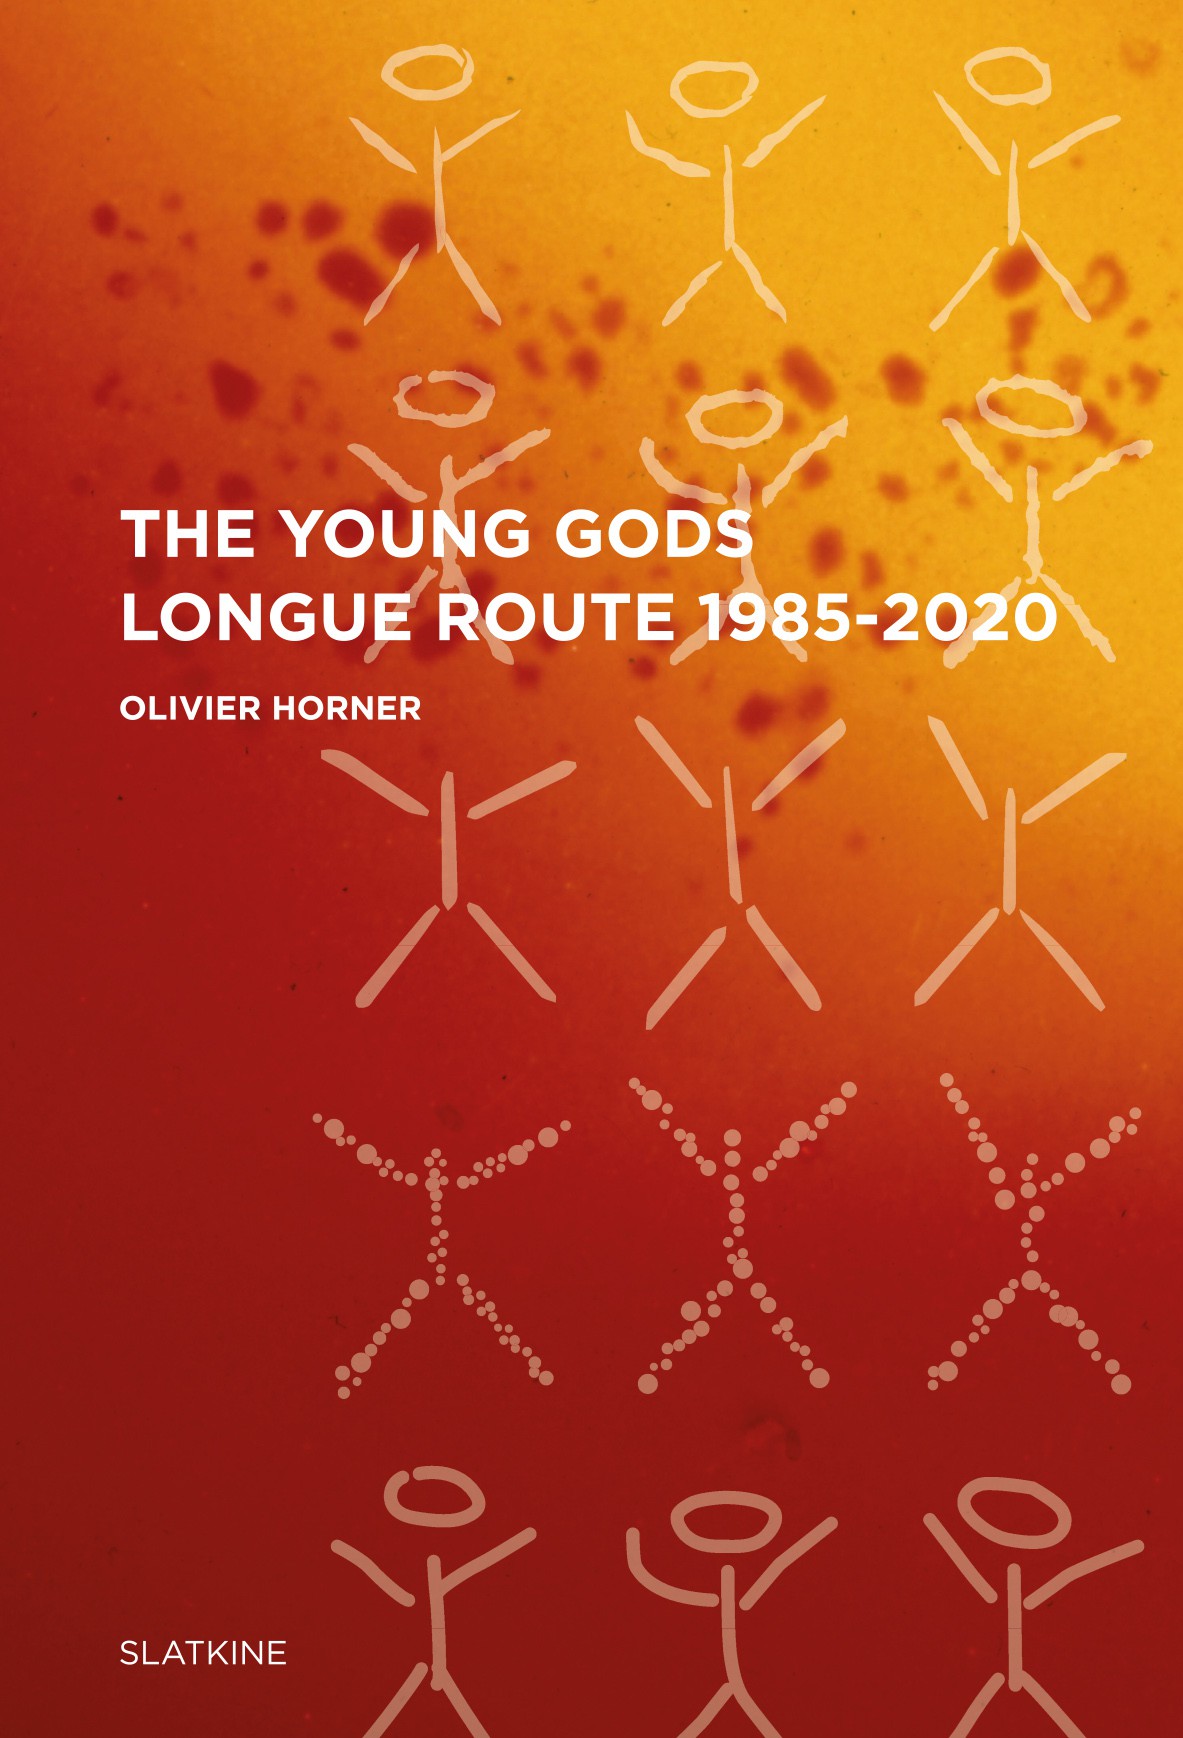 THE YOUNG GODS – Longue Route 1985-2020